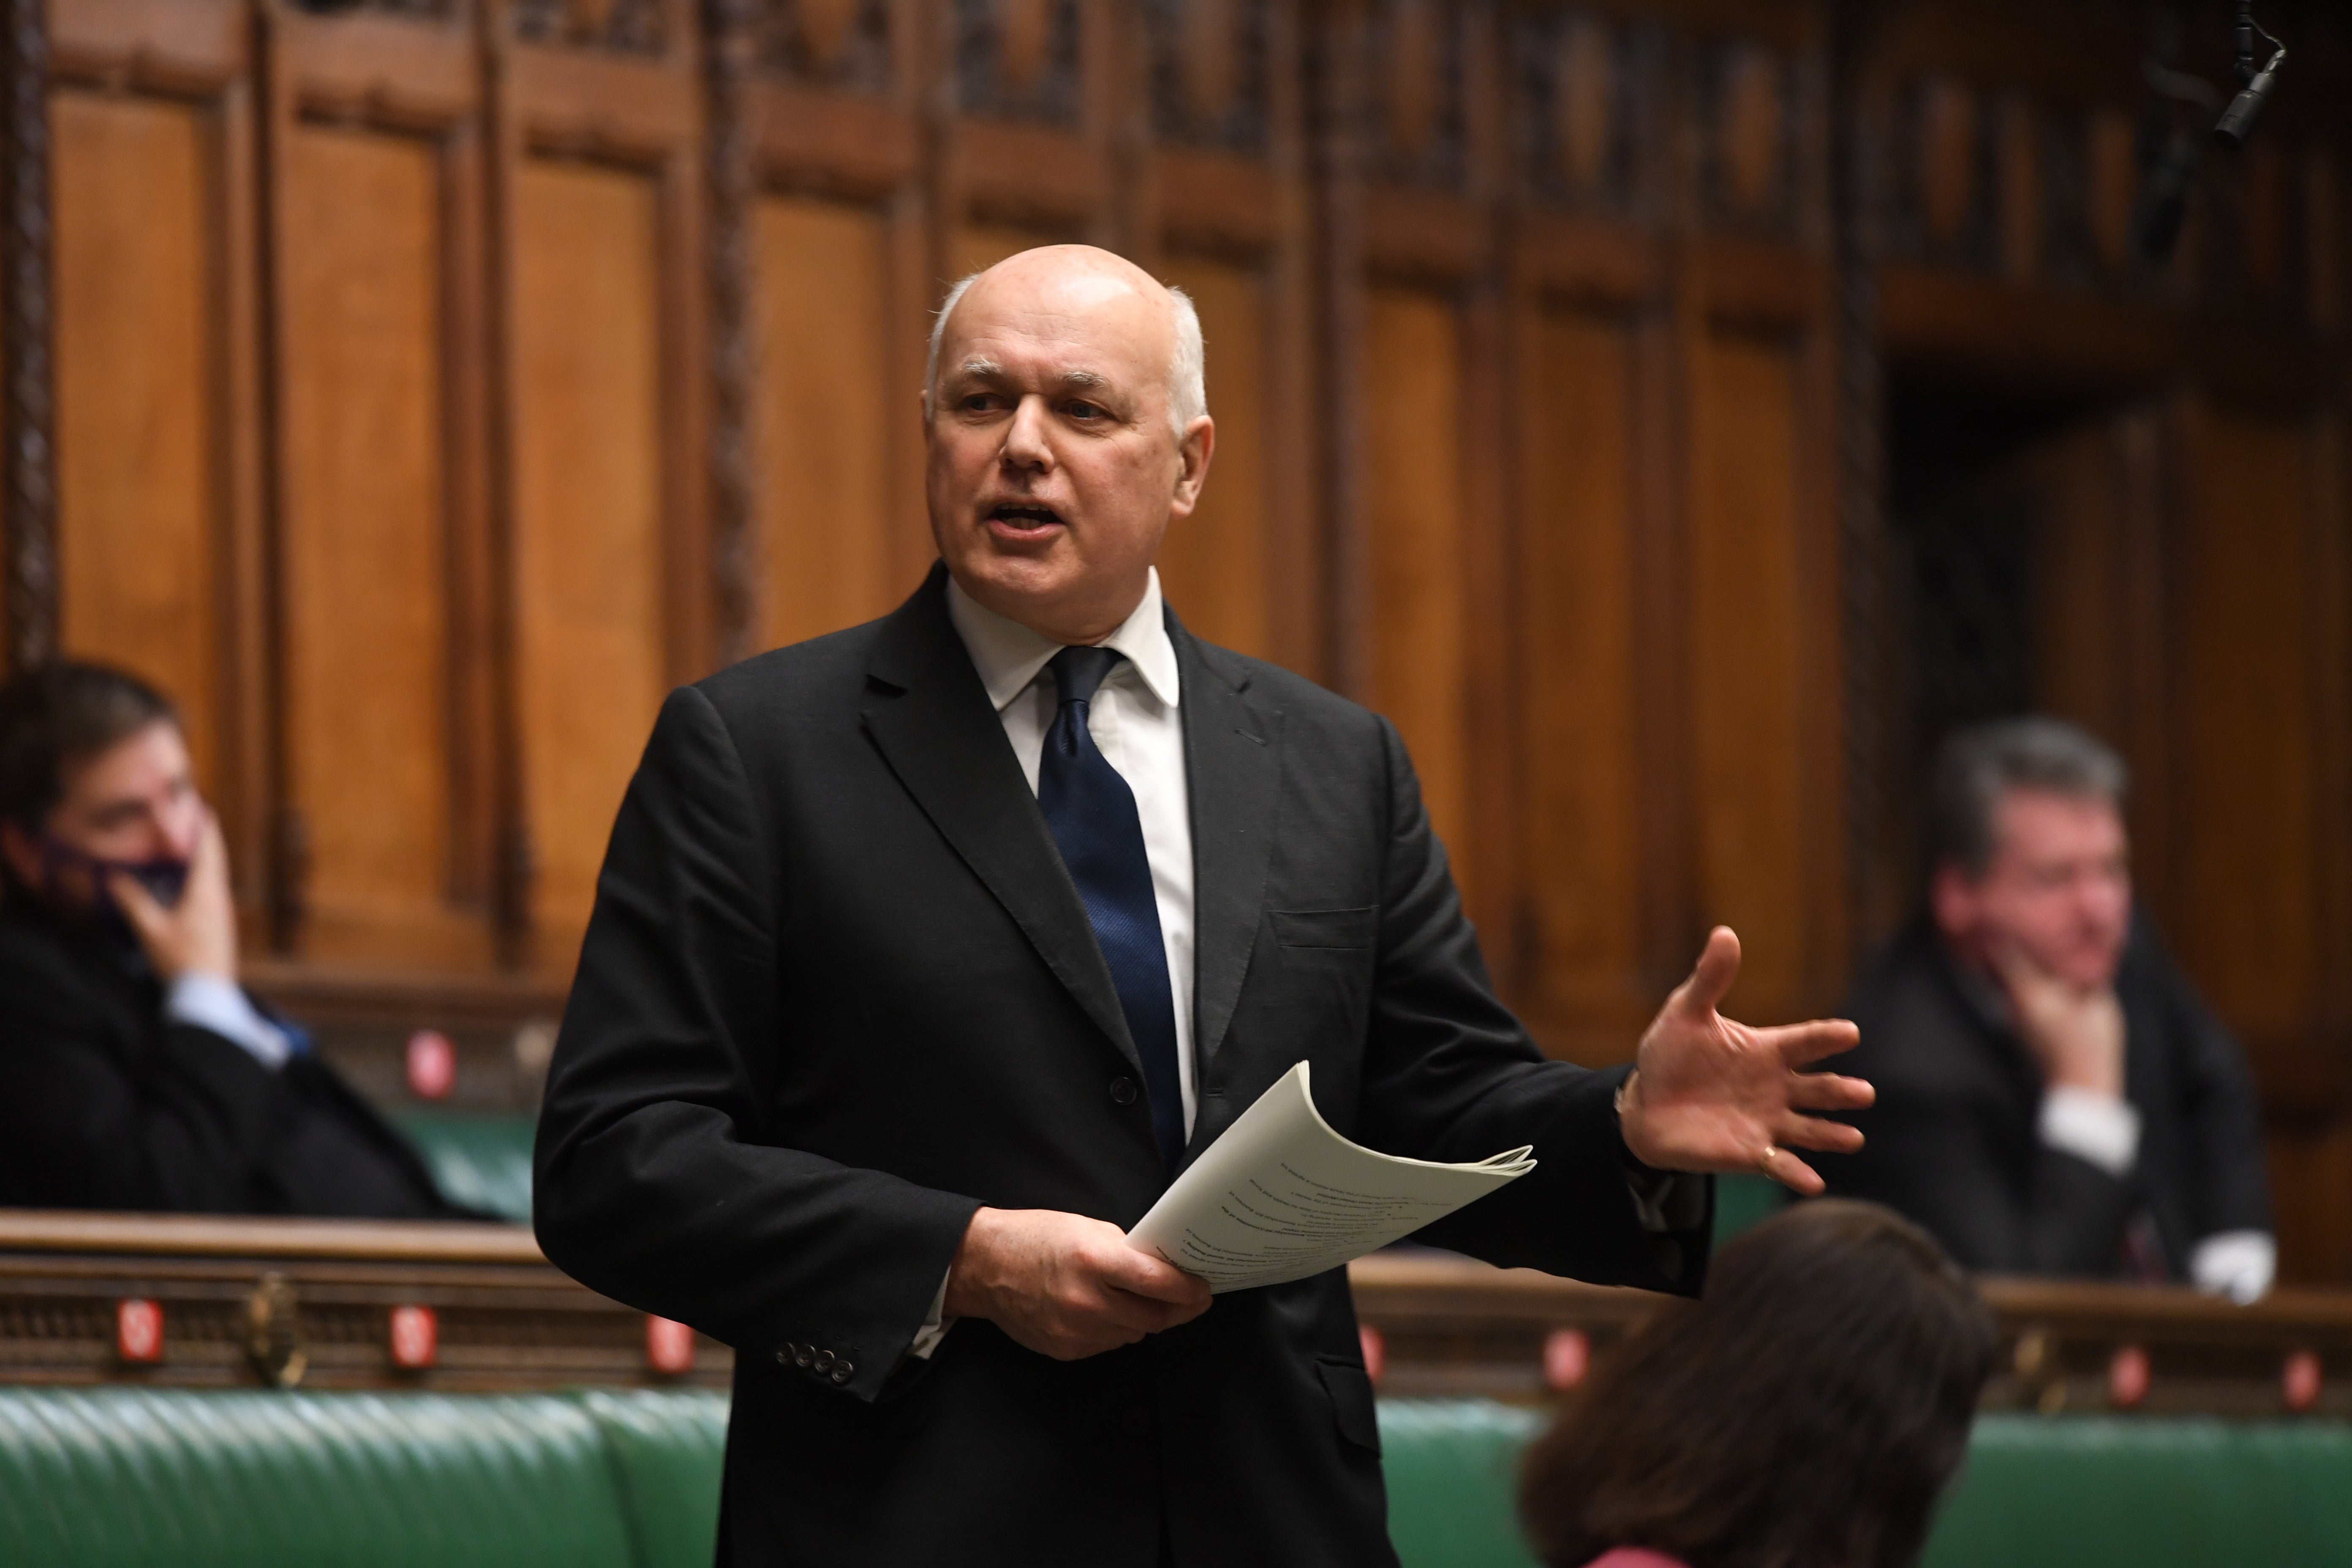 Sir Iain Duncan Smith leads six former cabinet ministers opposed to the cut